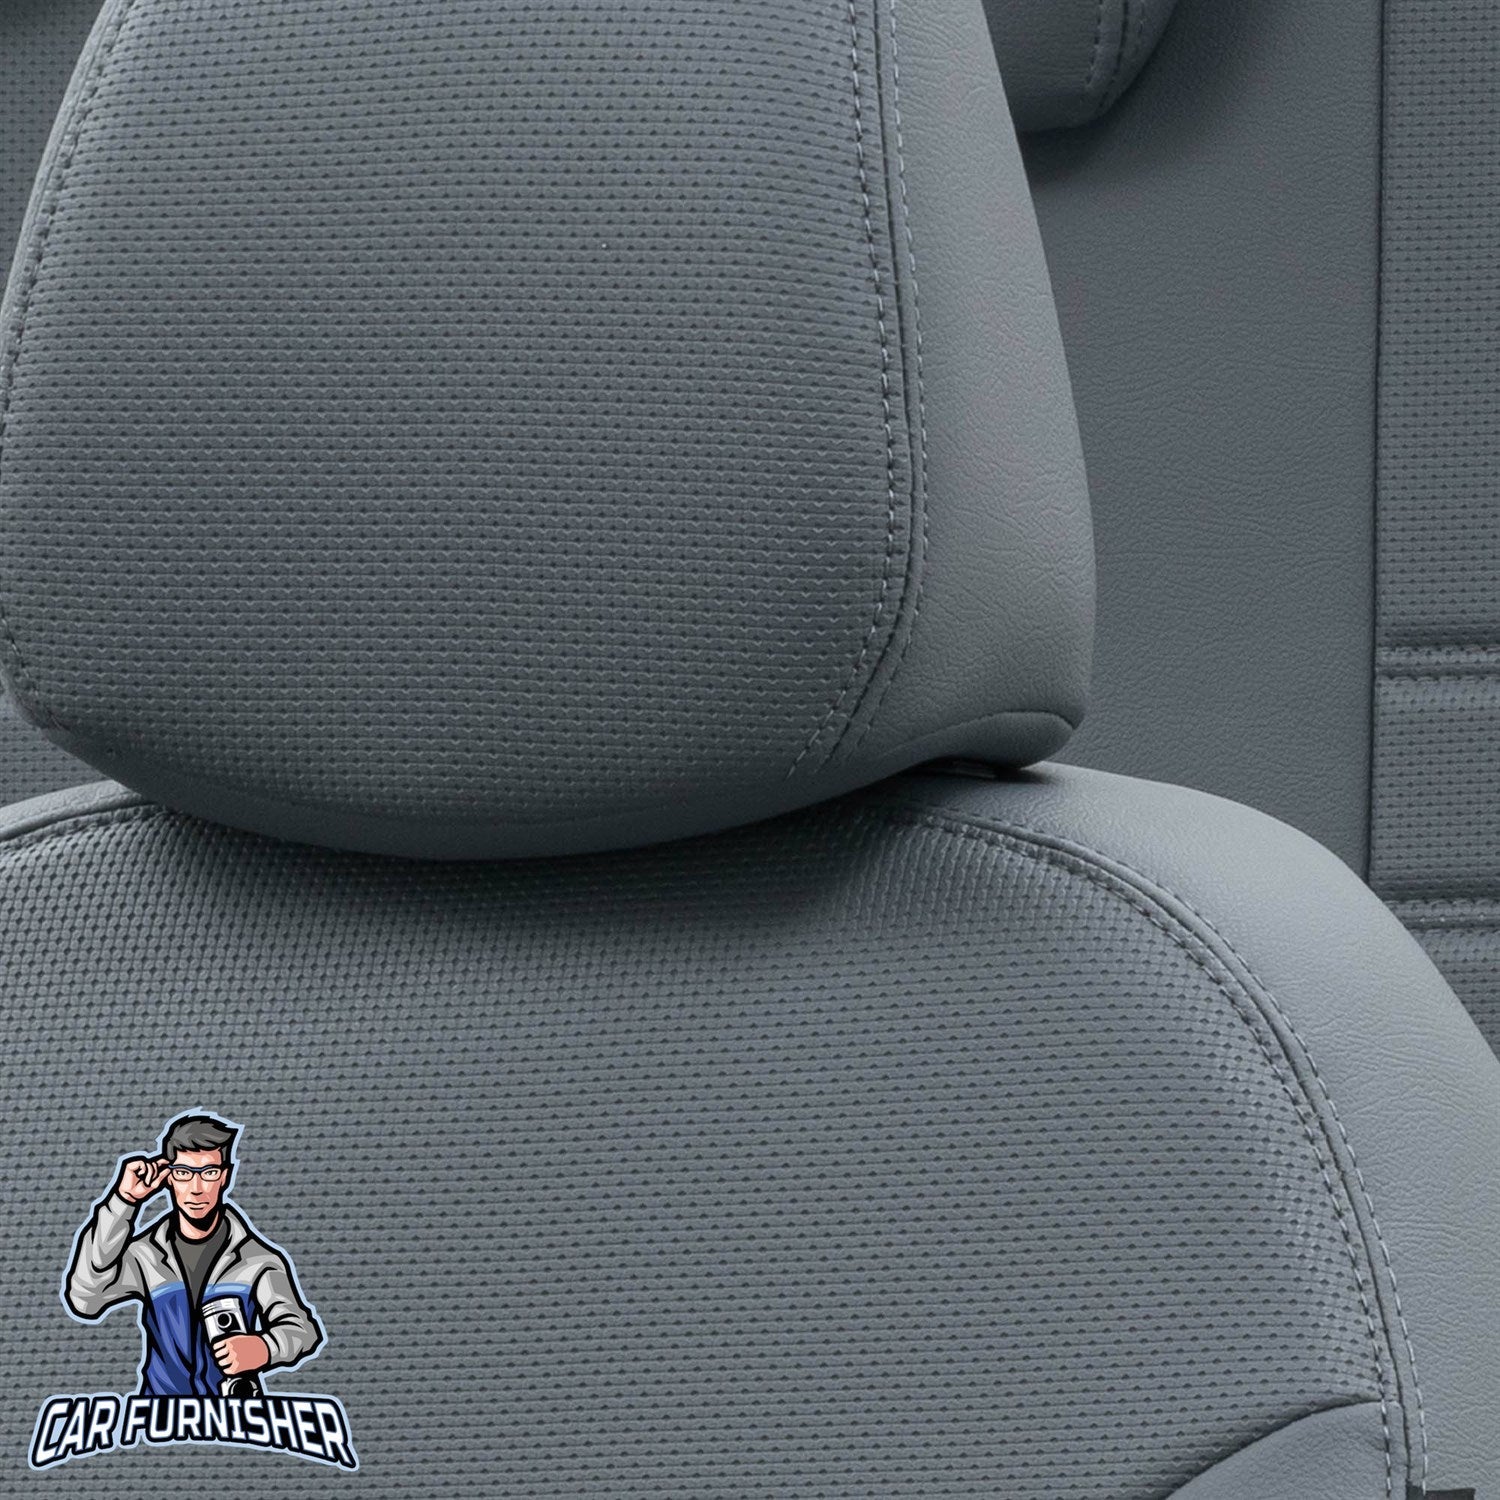 Volvo V50 Car Seat Cover 2004-2012 MW/T5 New York Design Smoked Full Set (5 Seats + Handrest) Leather & Fabric